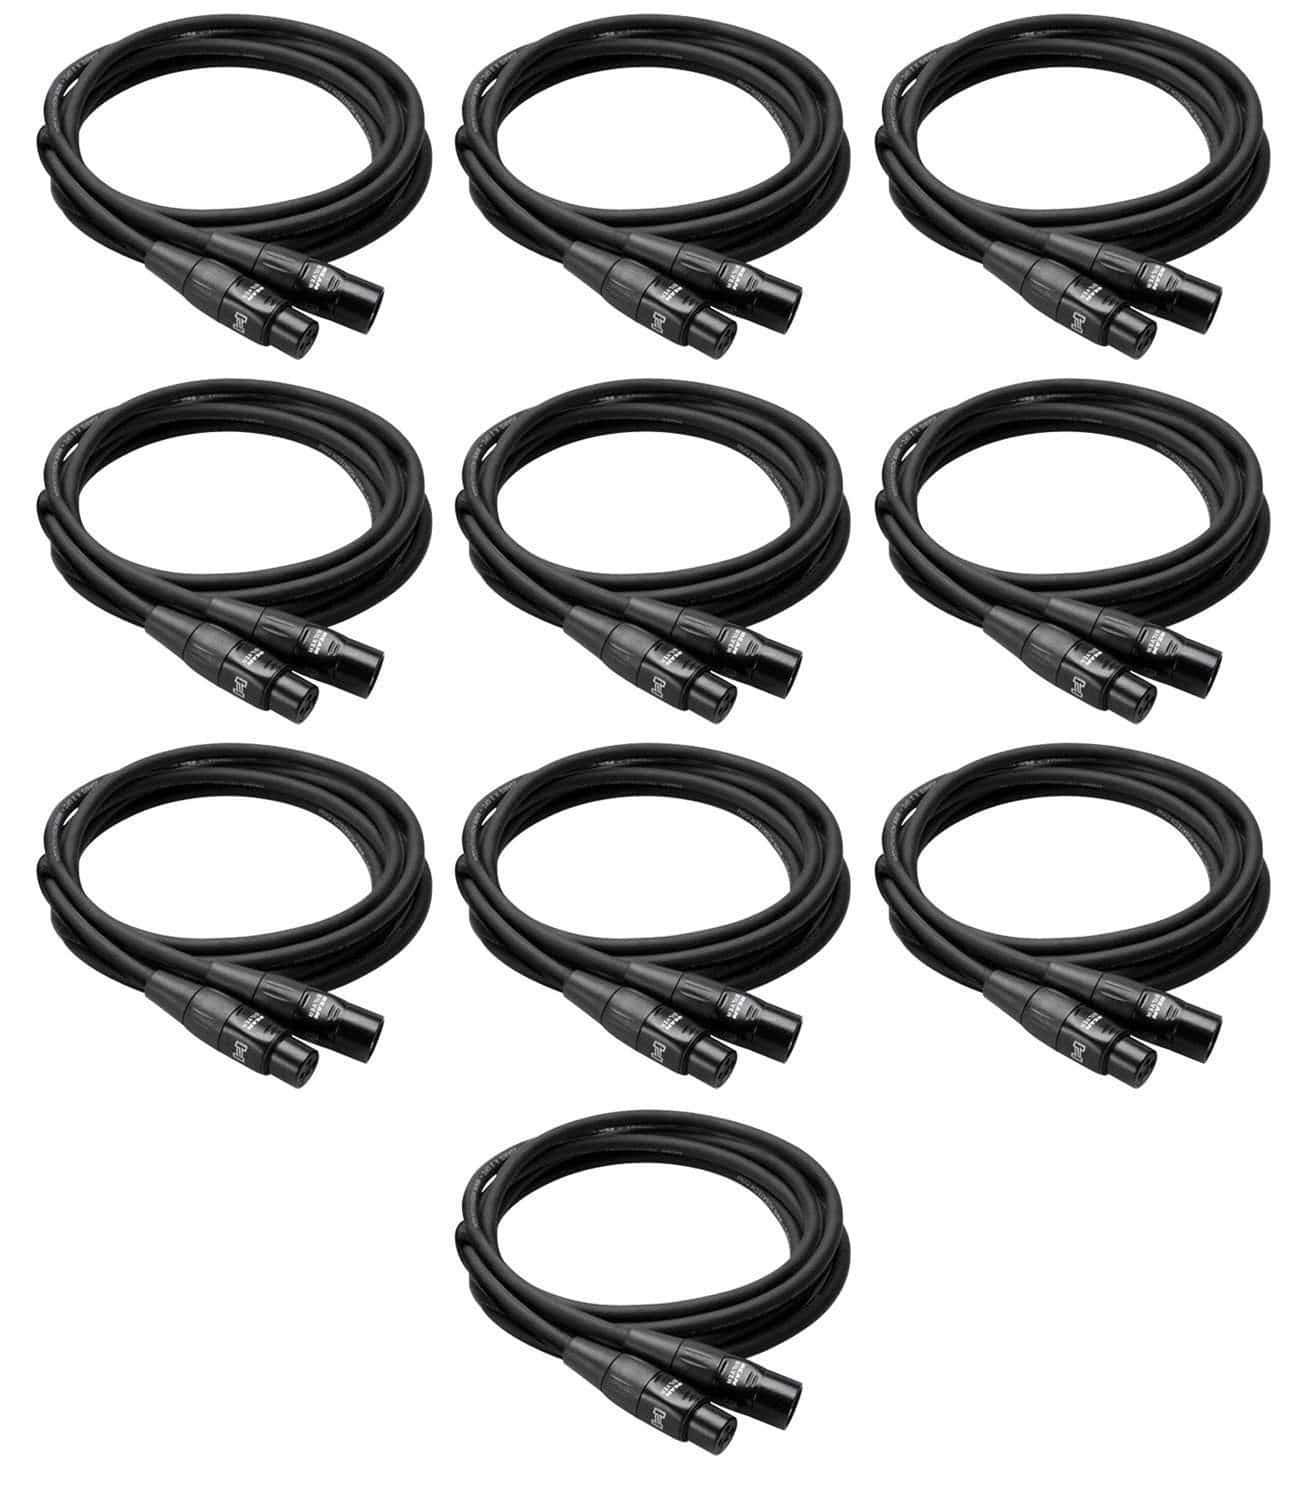 25ft Pro Grade XLR Microphone Cable - 10 Pack - ProSound and Stage Lighting